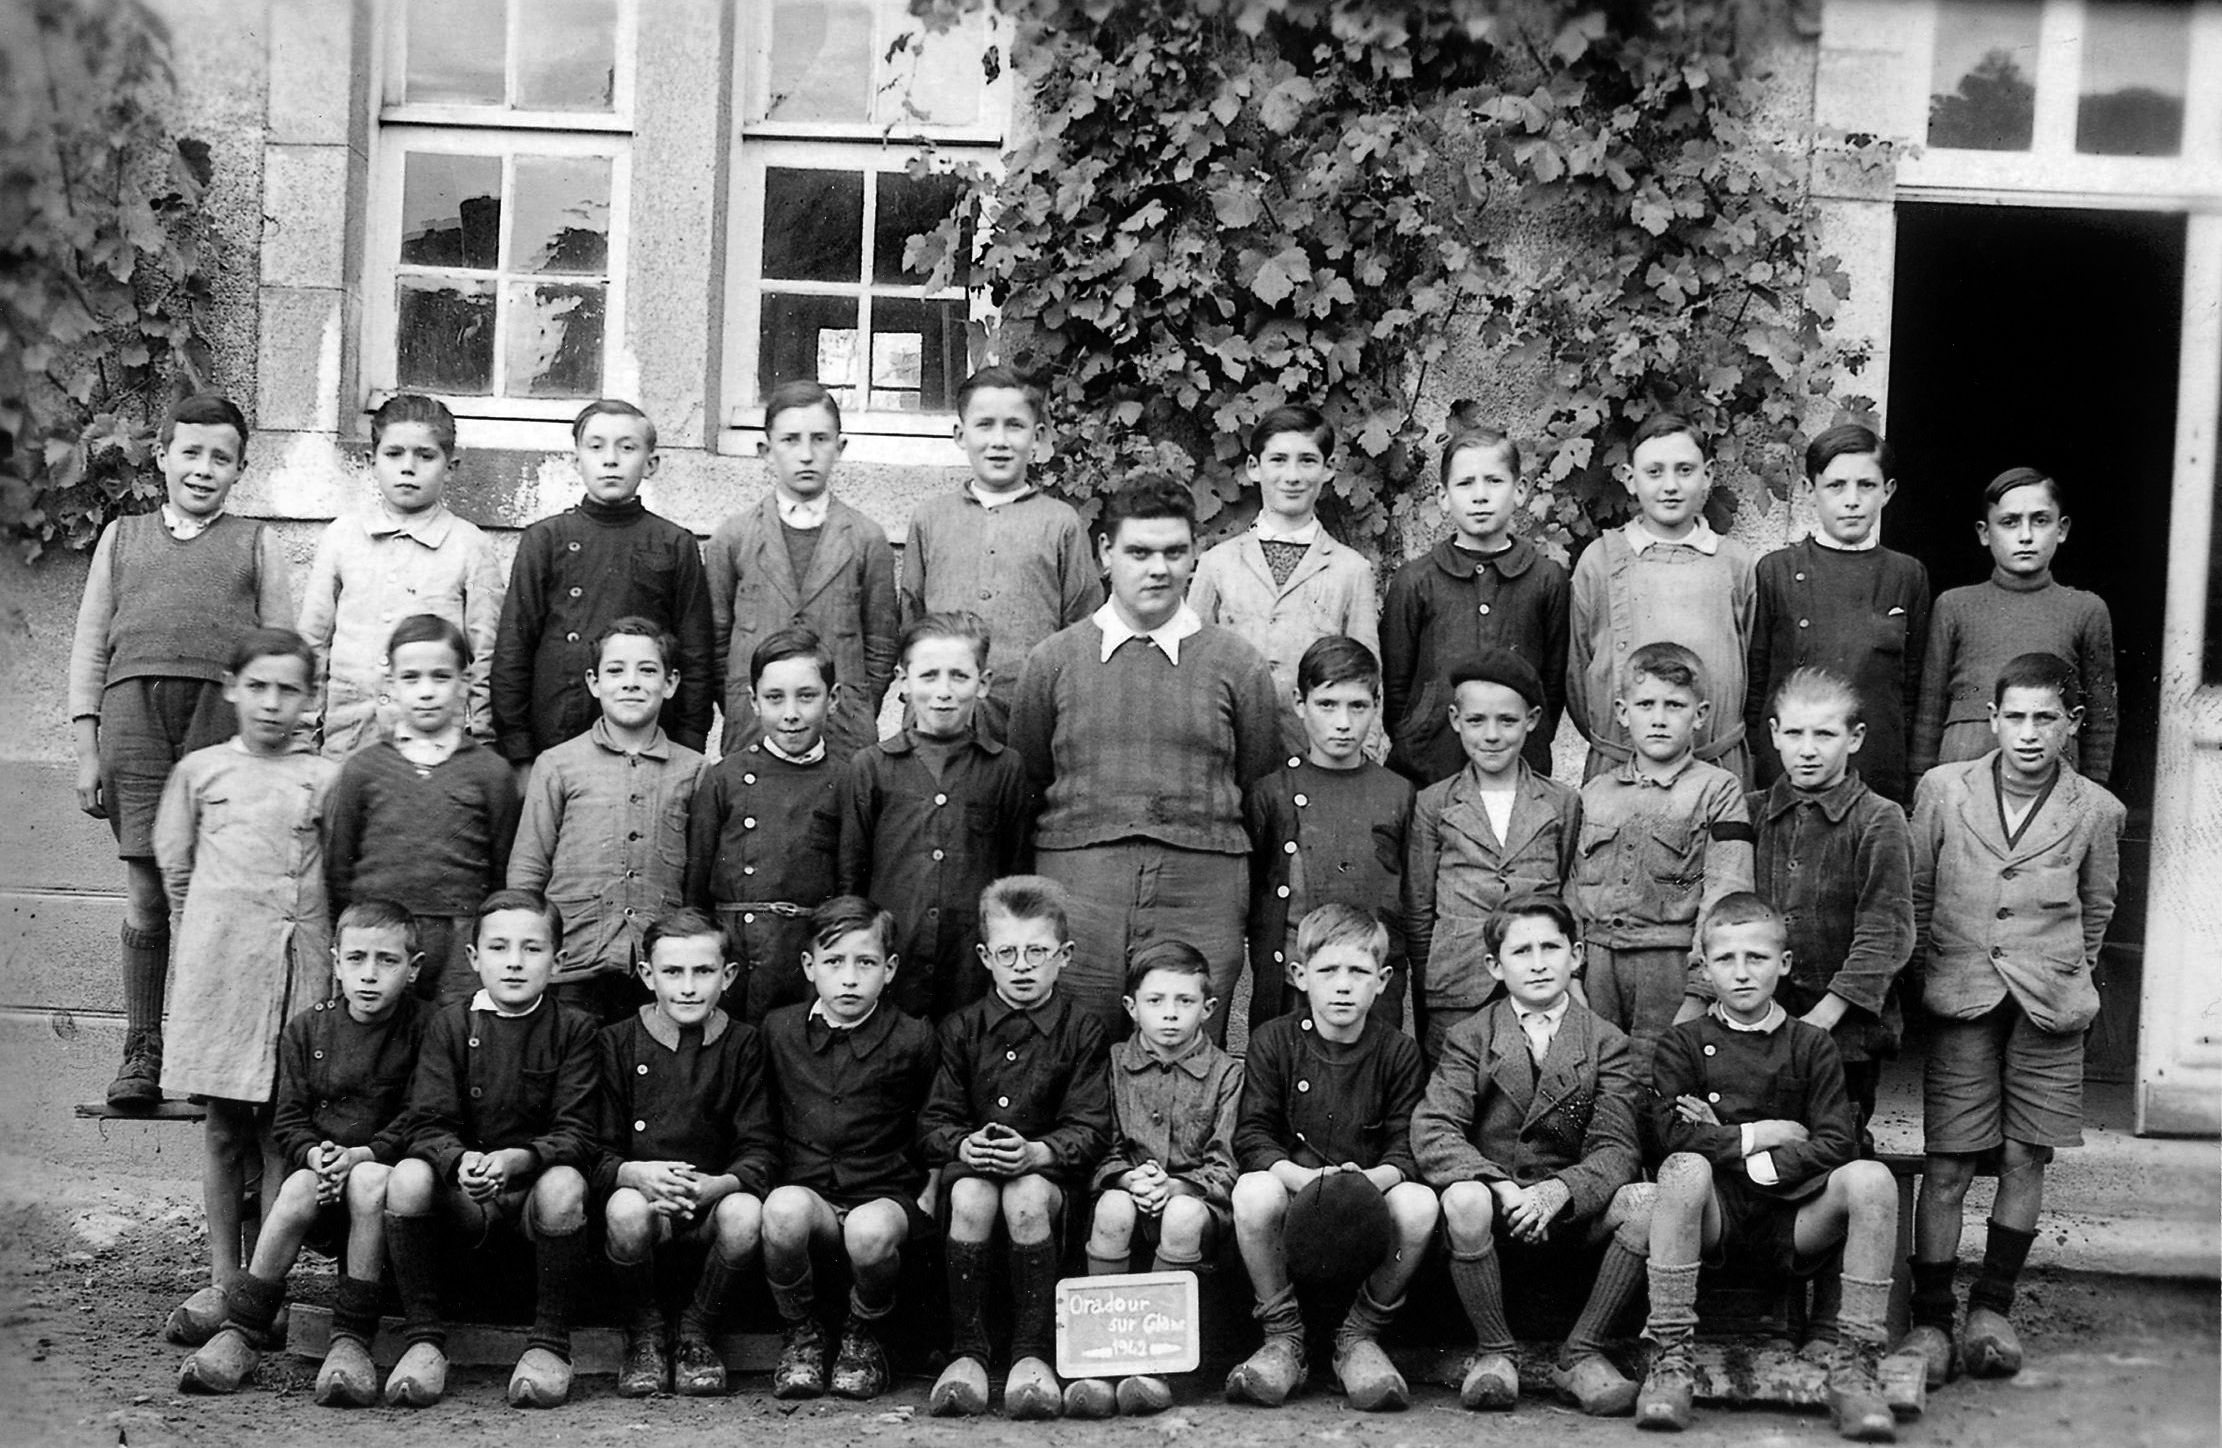 There were three schools in Oradour, one each for girls, boys and the Lorraine refugees. By the time the inferno in the church had extinguished itself, all the children were dead except plucky little seven-year-old Roger Godfrin, who had swum the River Glane to escape his captors. 